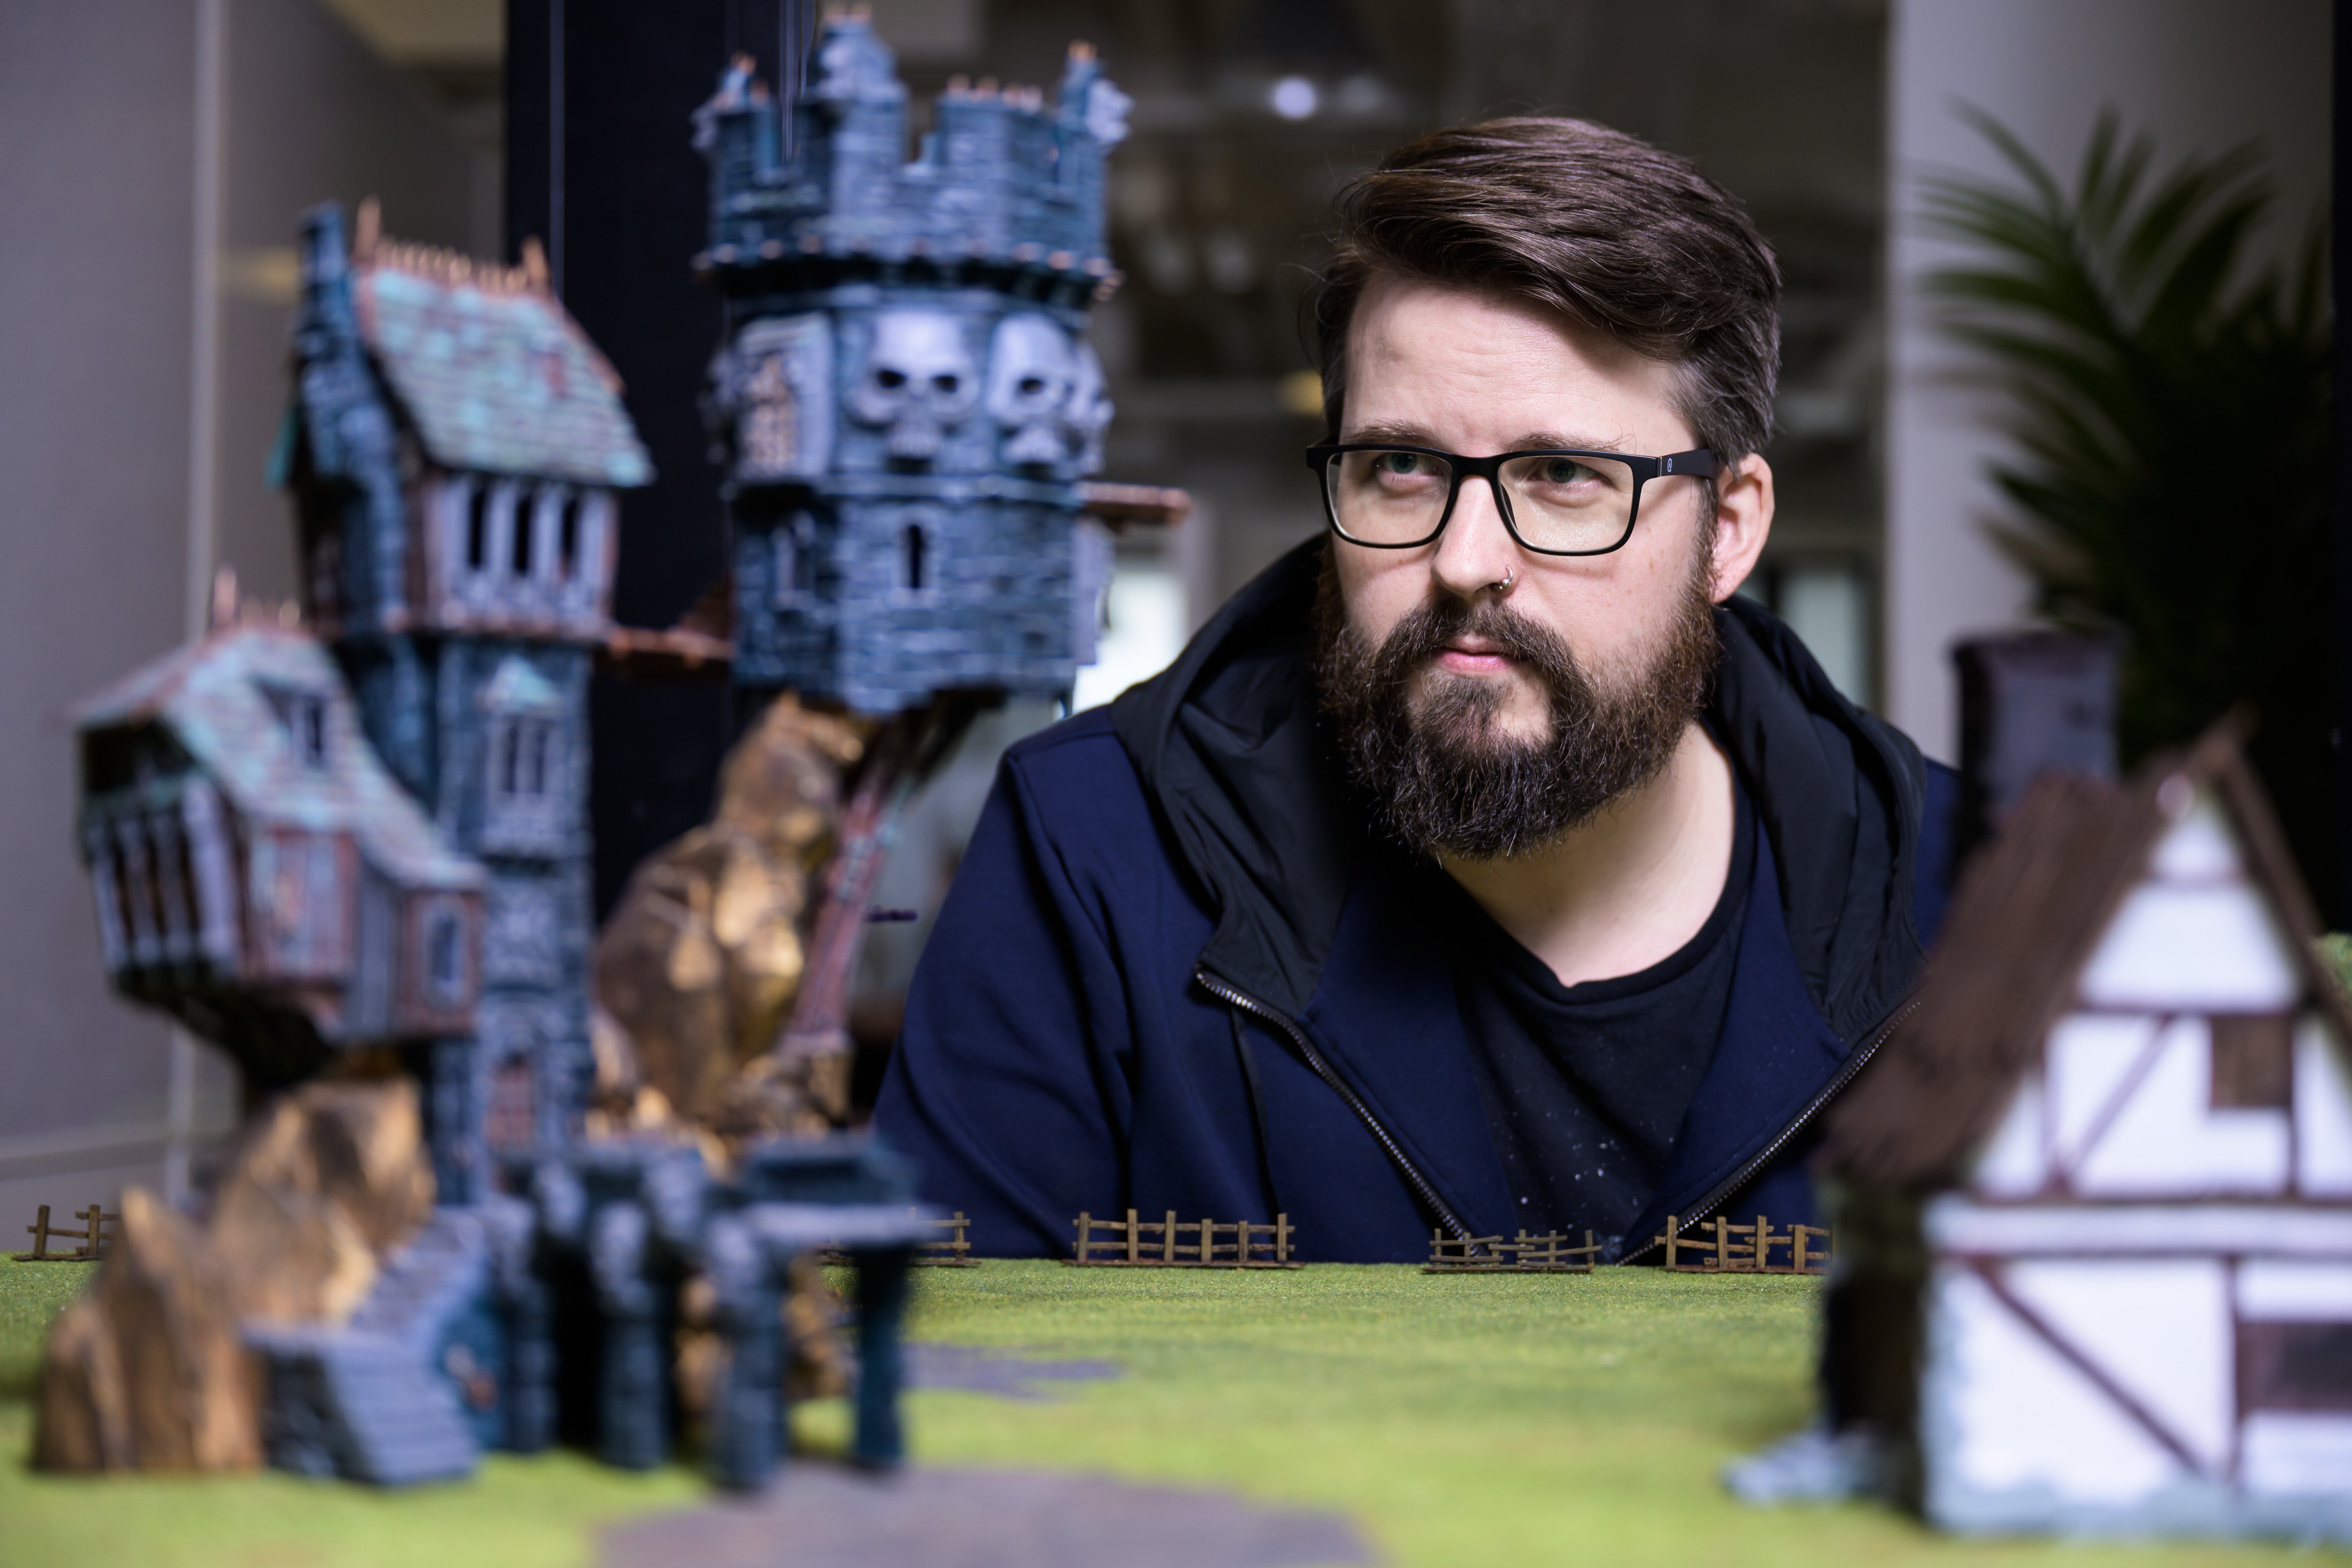 Darktide preview - Fatshark's Mats Andersson previews a tabletop layout of Warhammer buildings and objects